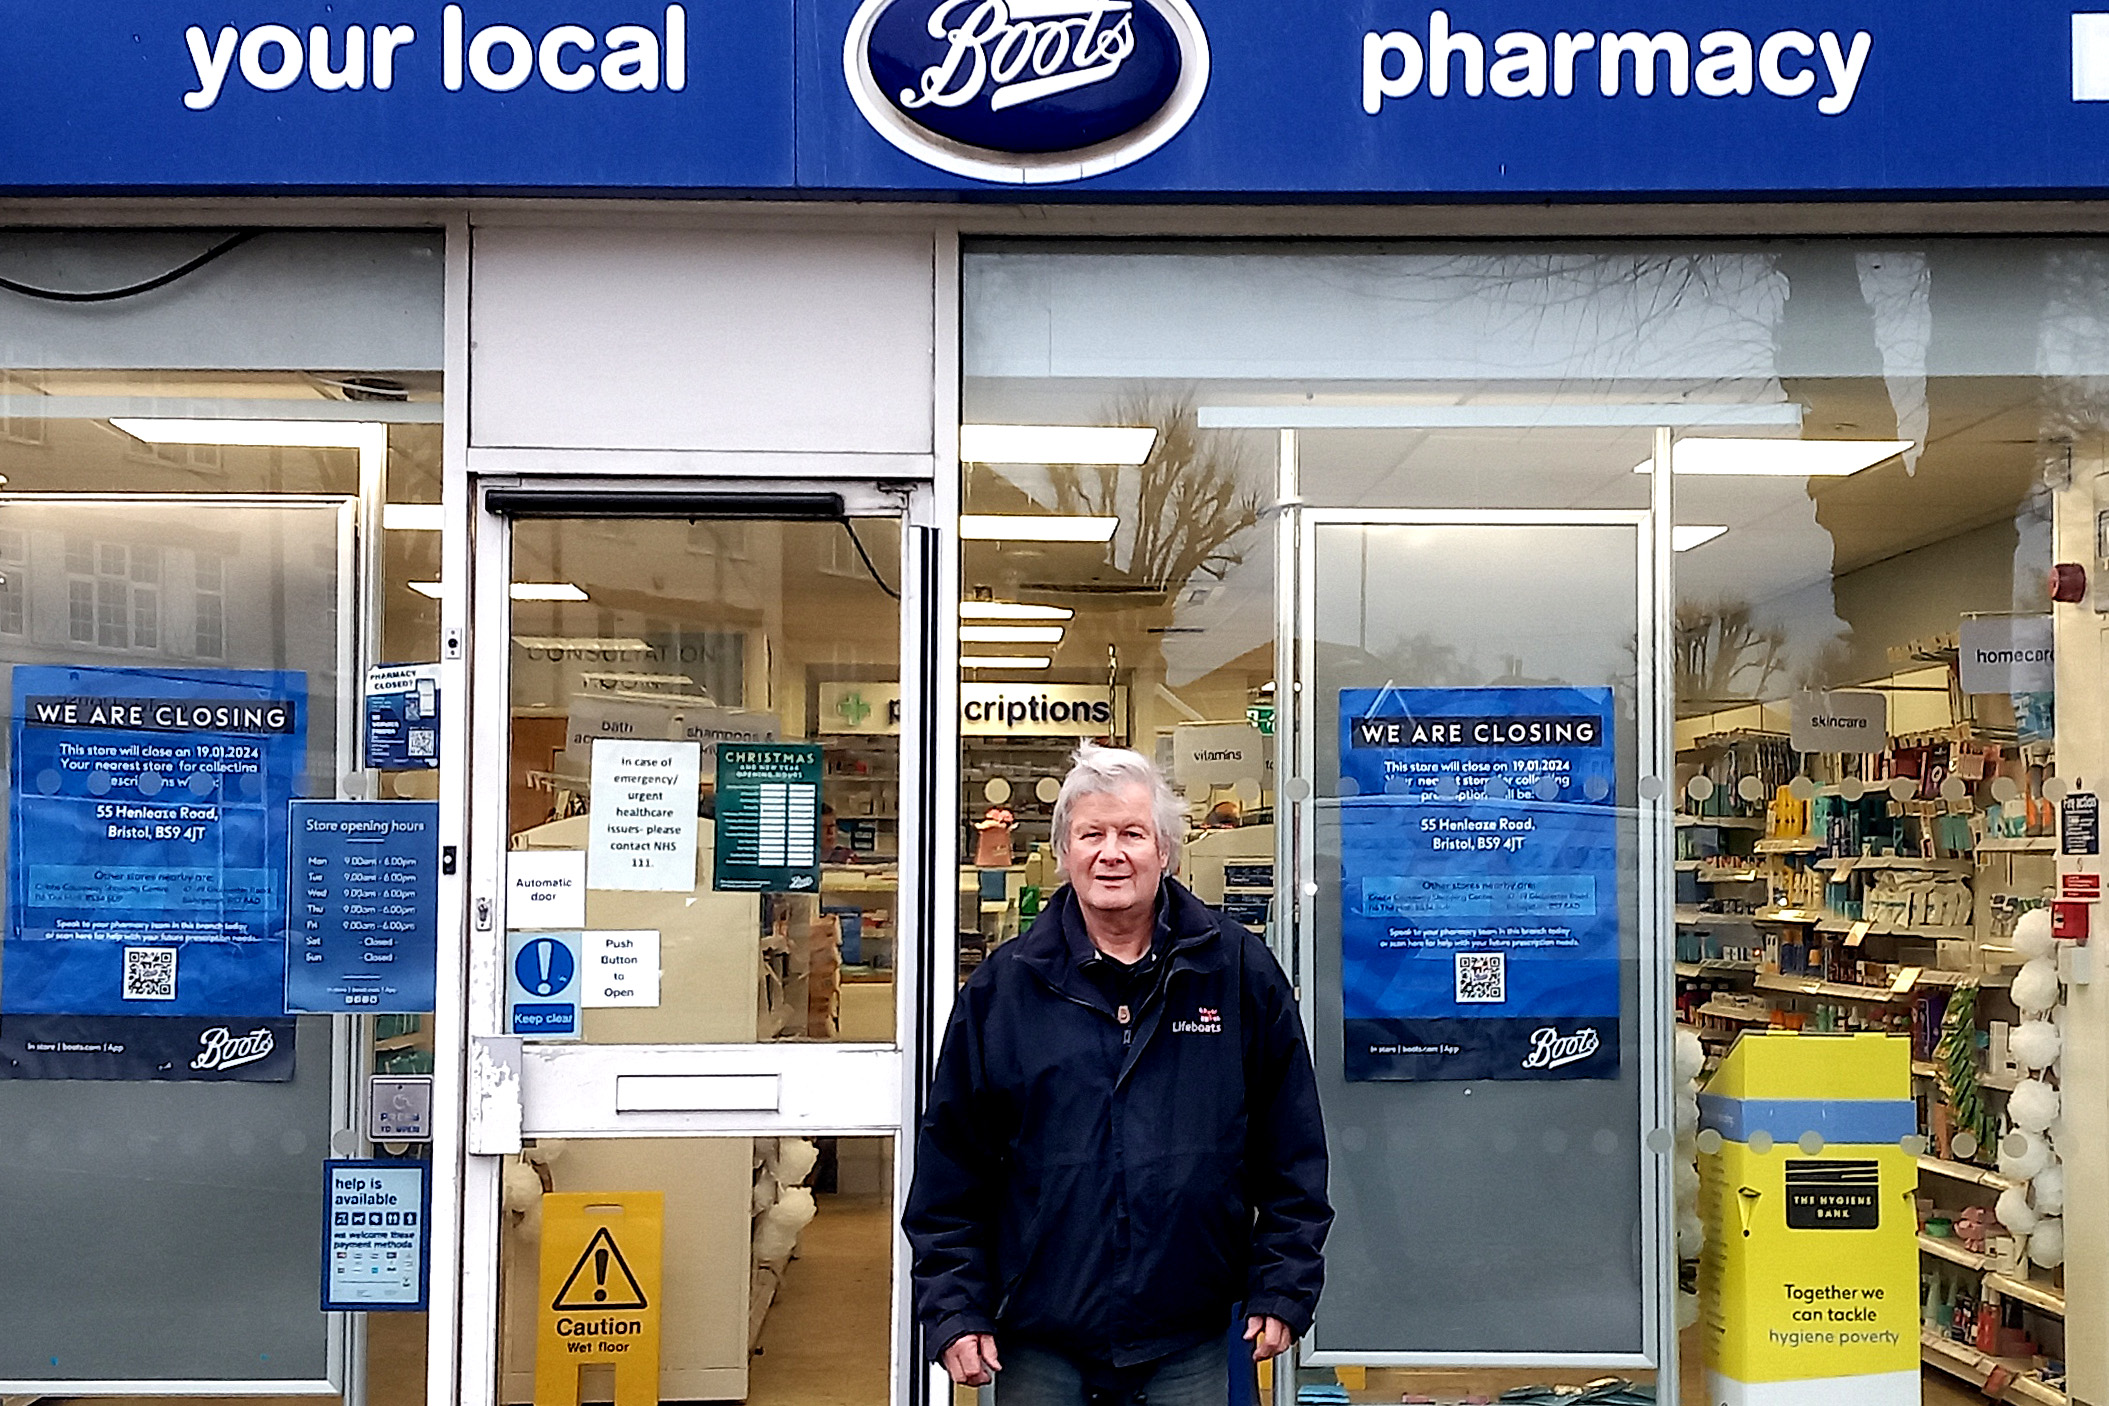 Photo Neil Goldsmith in front of Boots pharmacy